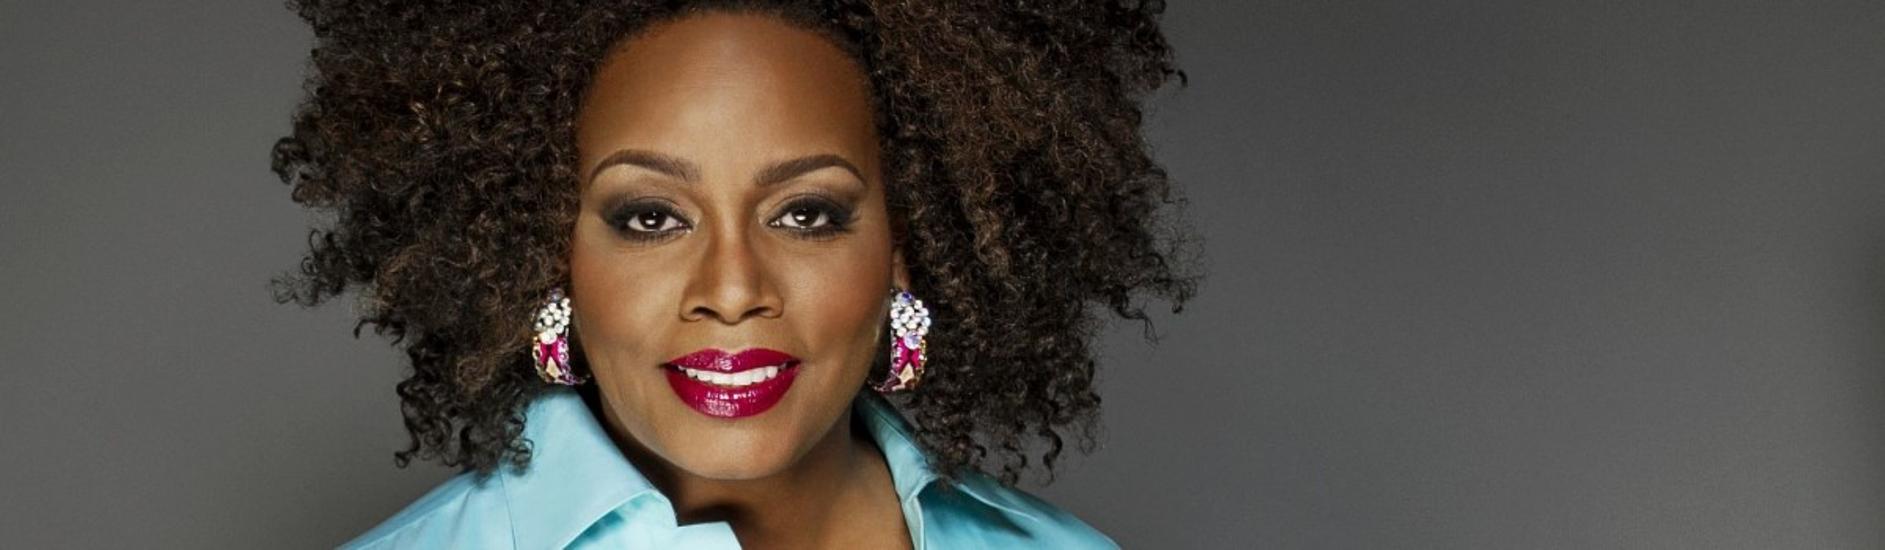 Dianne Reeves Concert, Mupa, 19 March